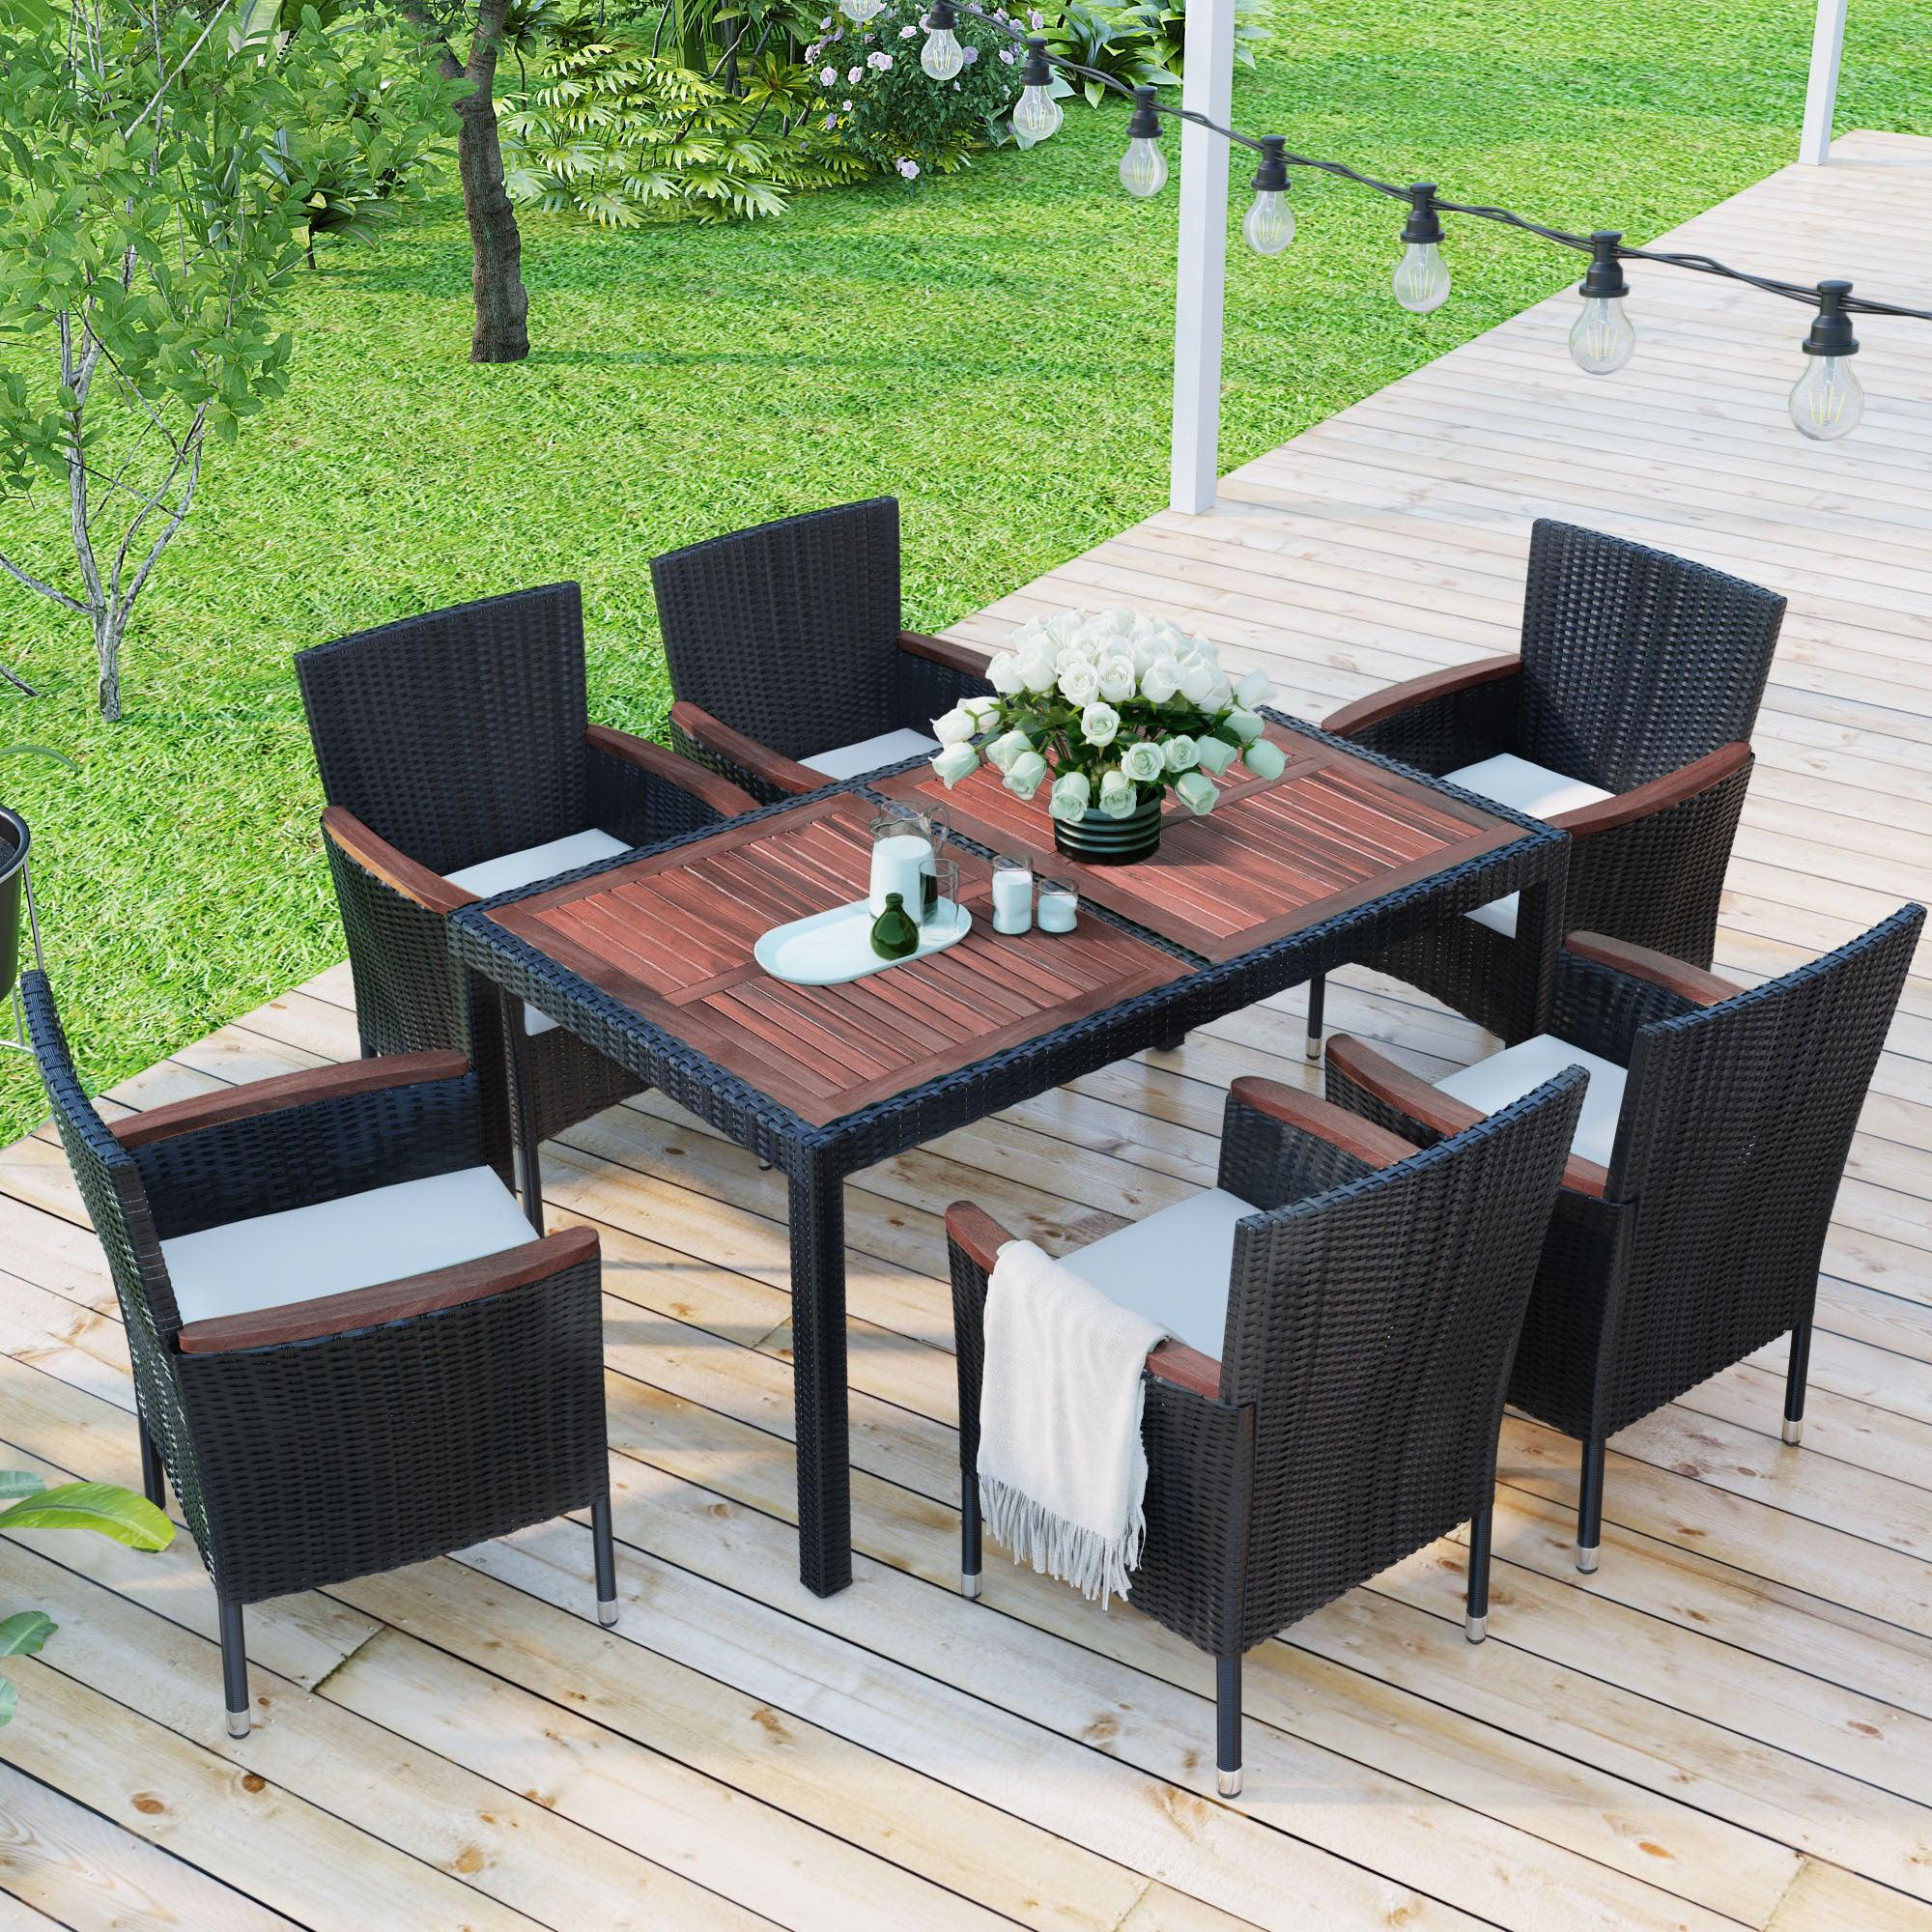 🆓🚛 7-Piece Outdoor Patio Dining Set, Garden PE Rattan Wicker Dining Table and Chairs Set, Acacia Wood Tabletop, Stackable Armrest Chairs with Cushions, Reddish-brown